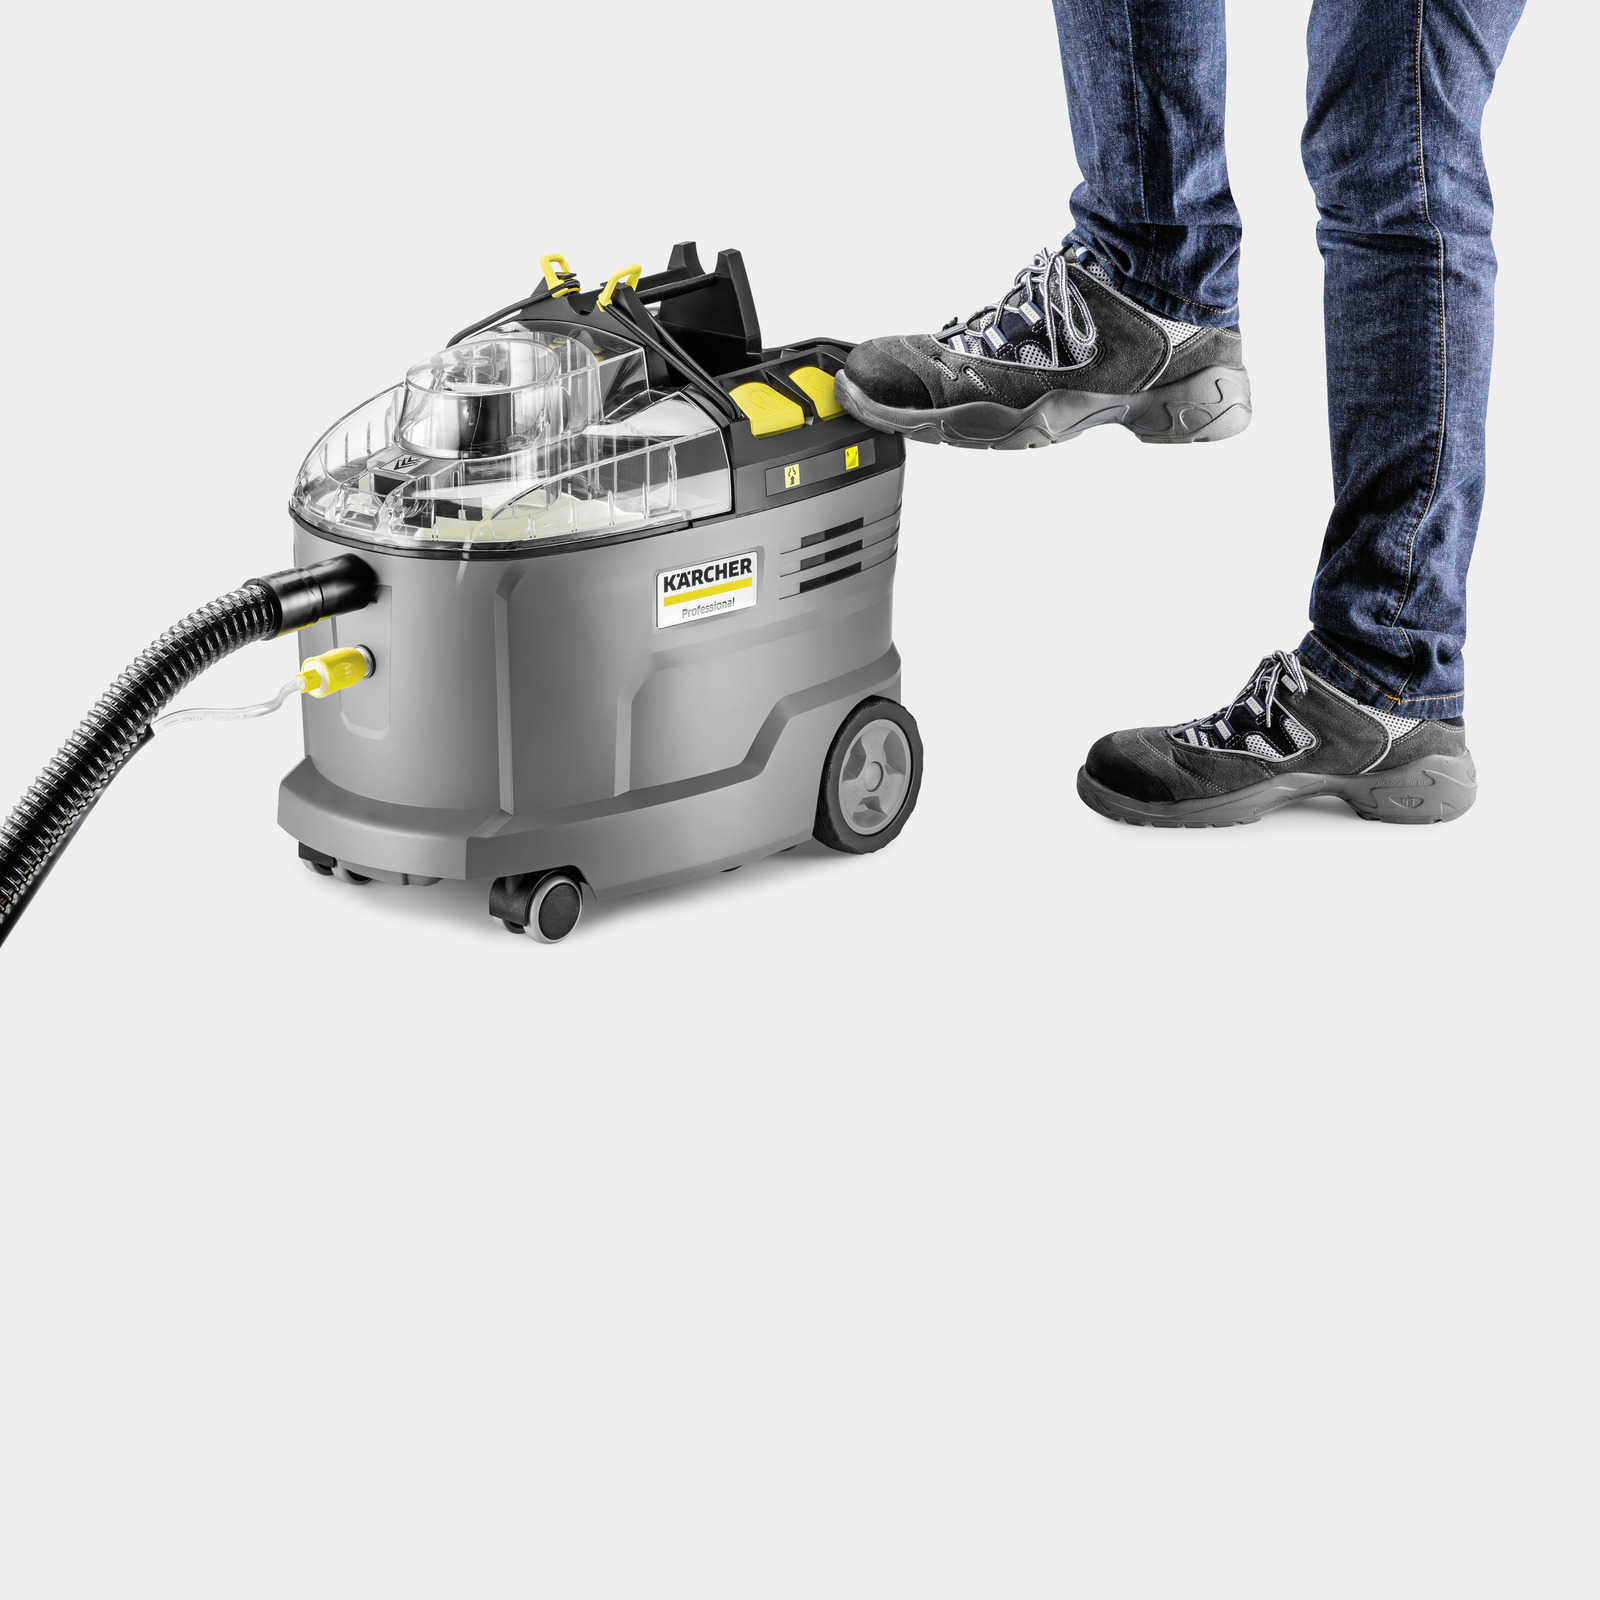 Karcher Puzzi 100 Professional Carpet & Upholstery Cleaning Machine - 240v